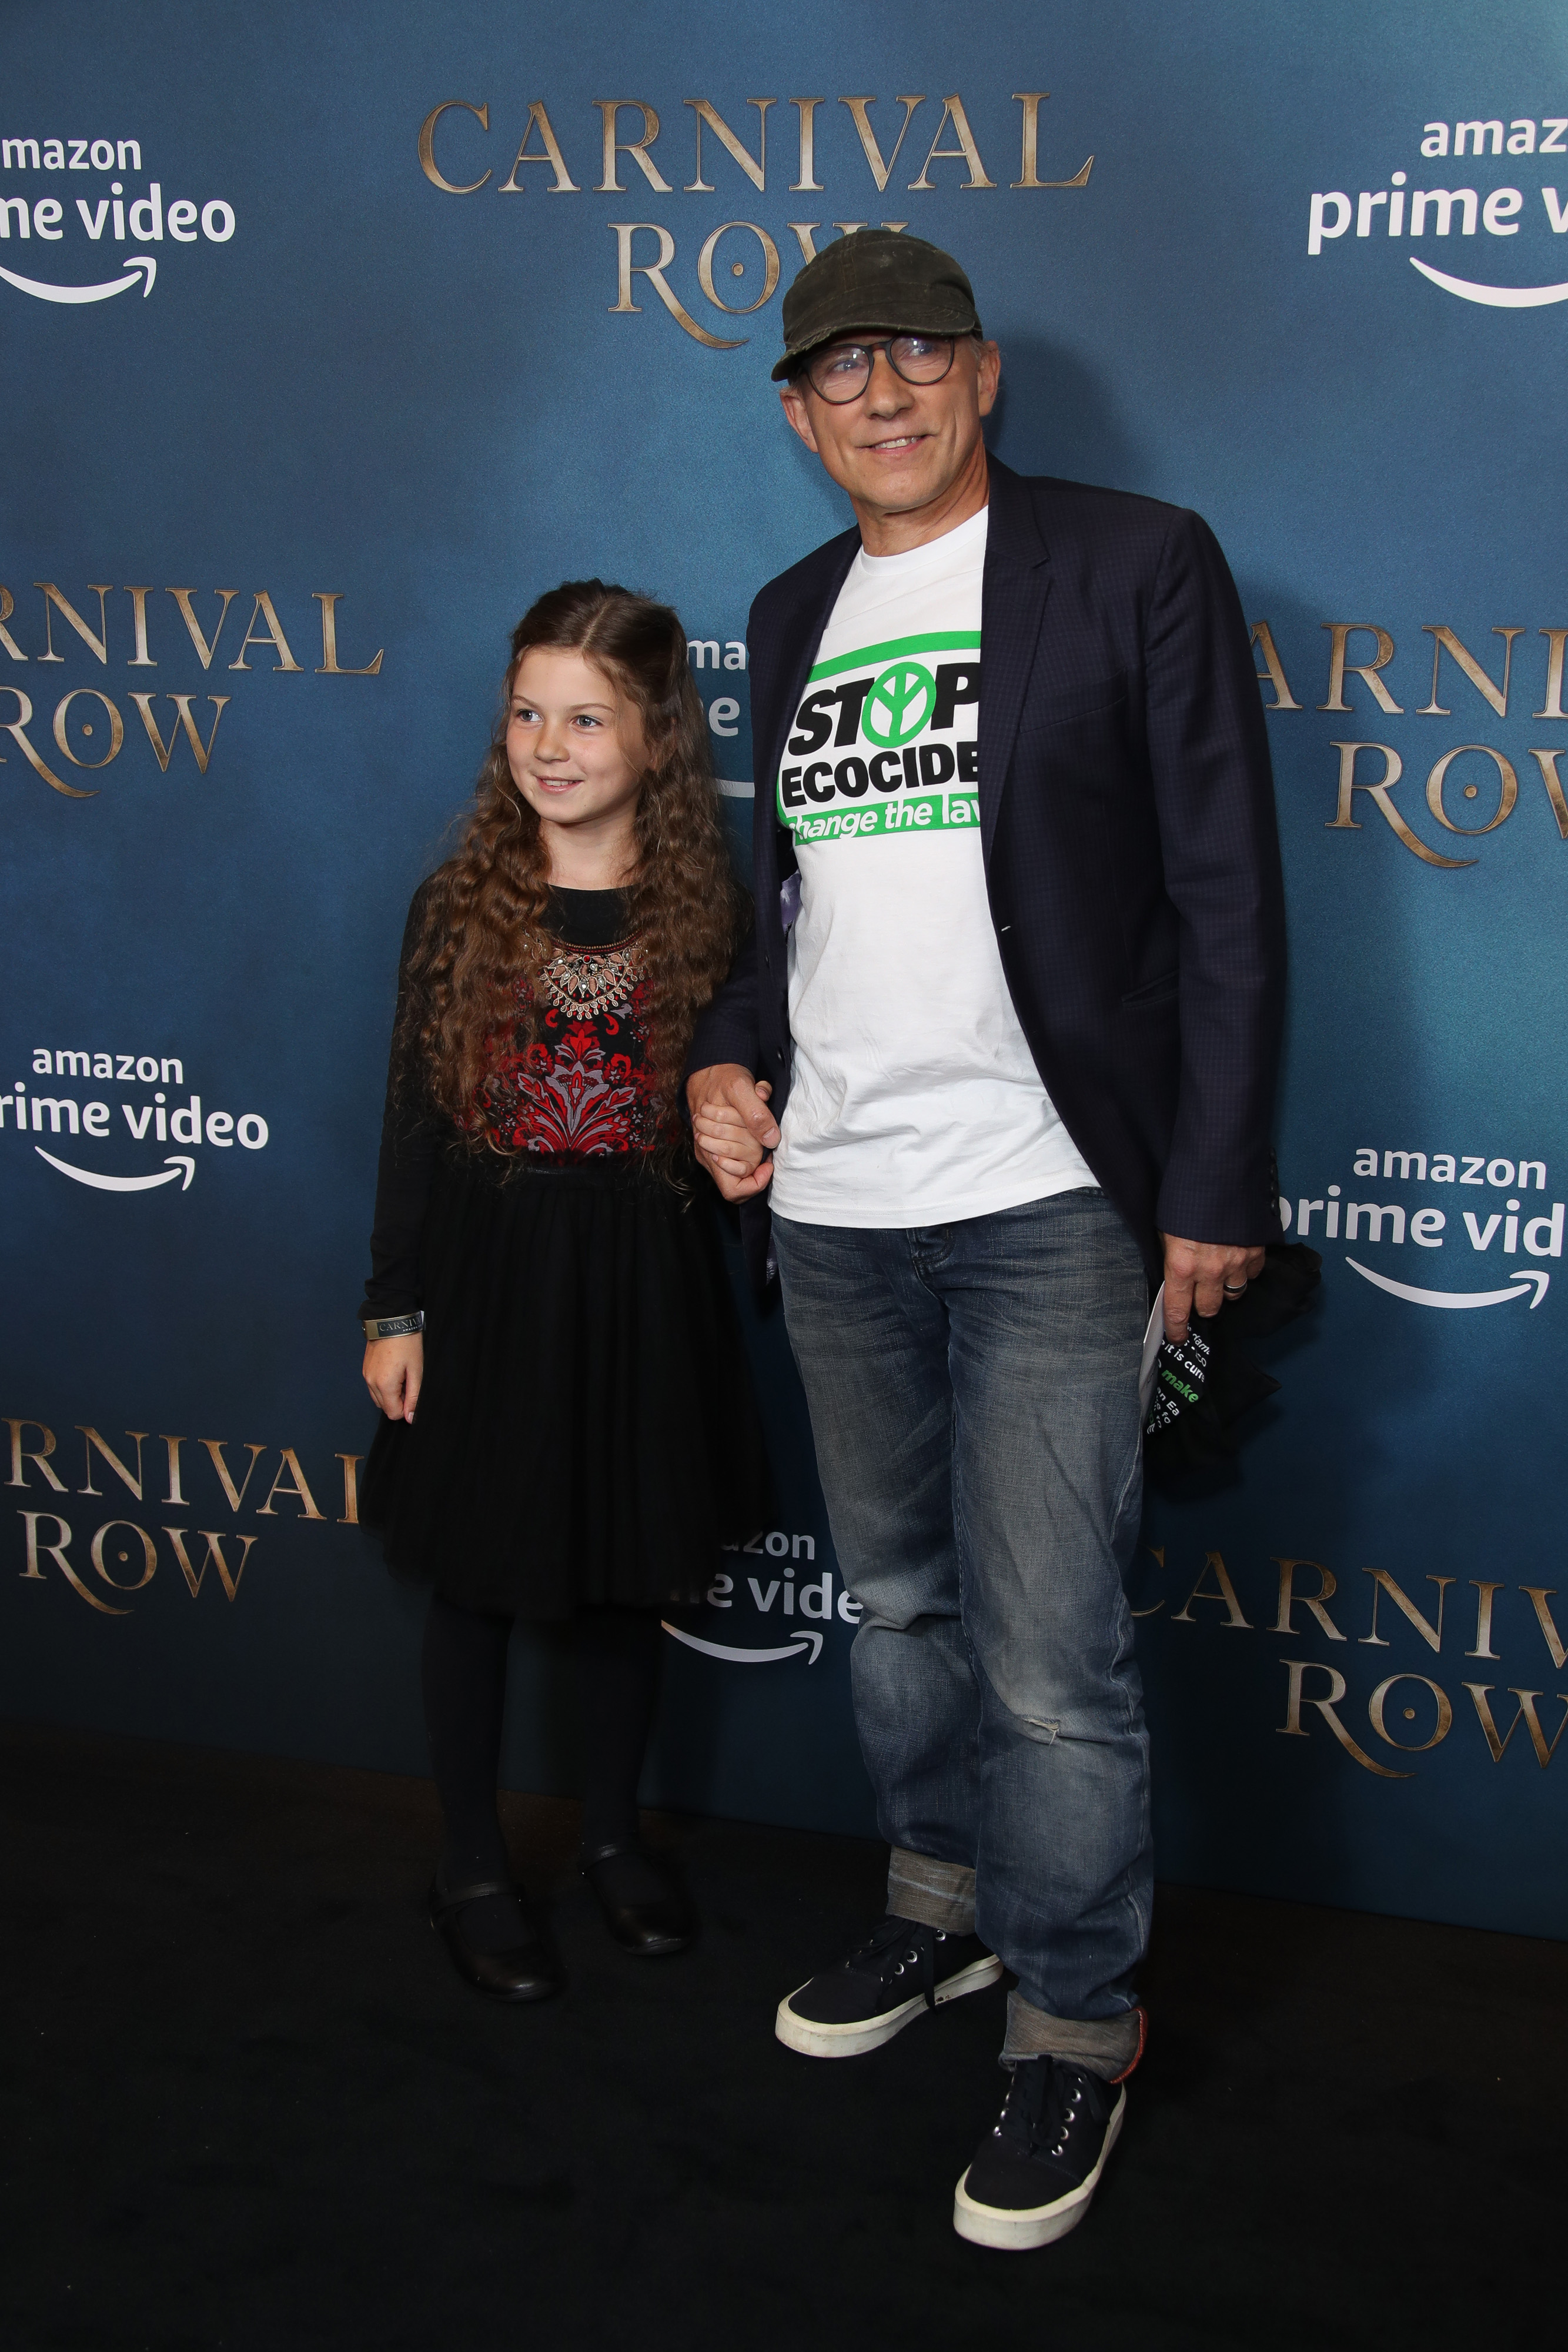 Simon McBurney, a middle-aged white man, wears a t-shirt reading "stop ecocide" on a red carpet with his young brunette daughter